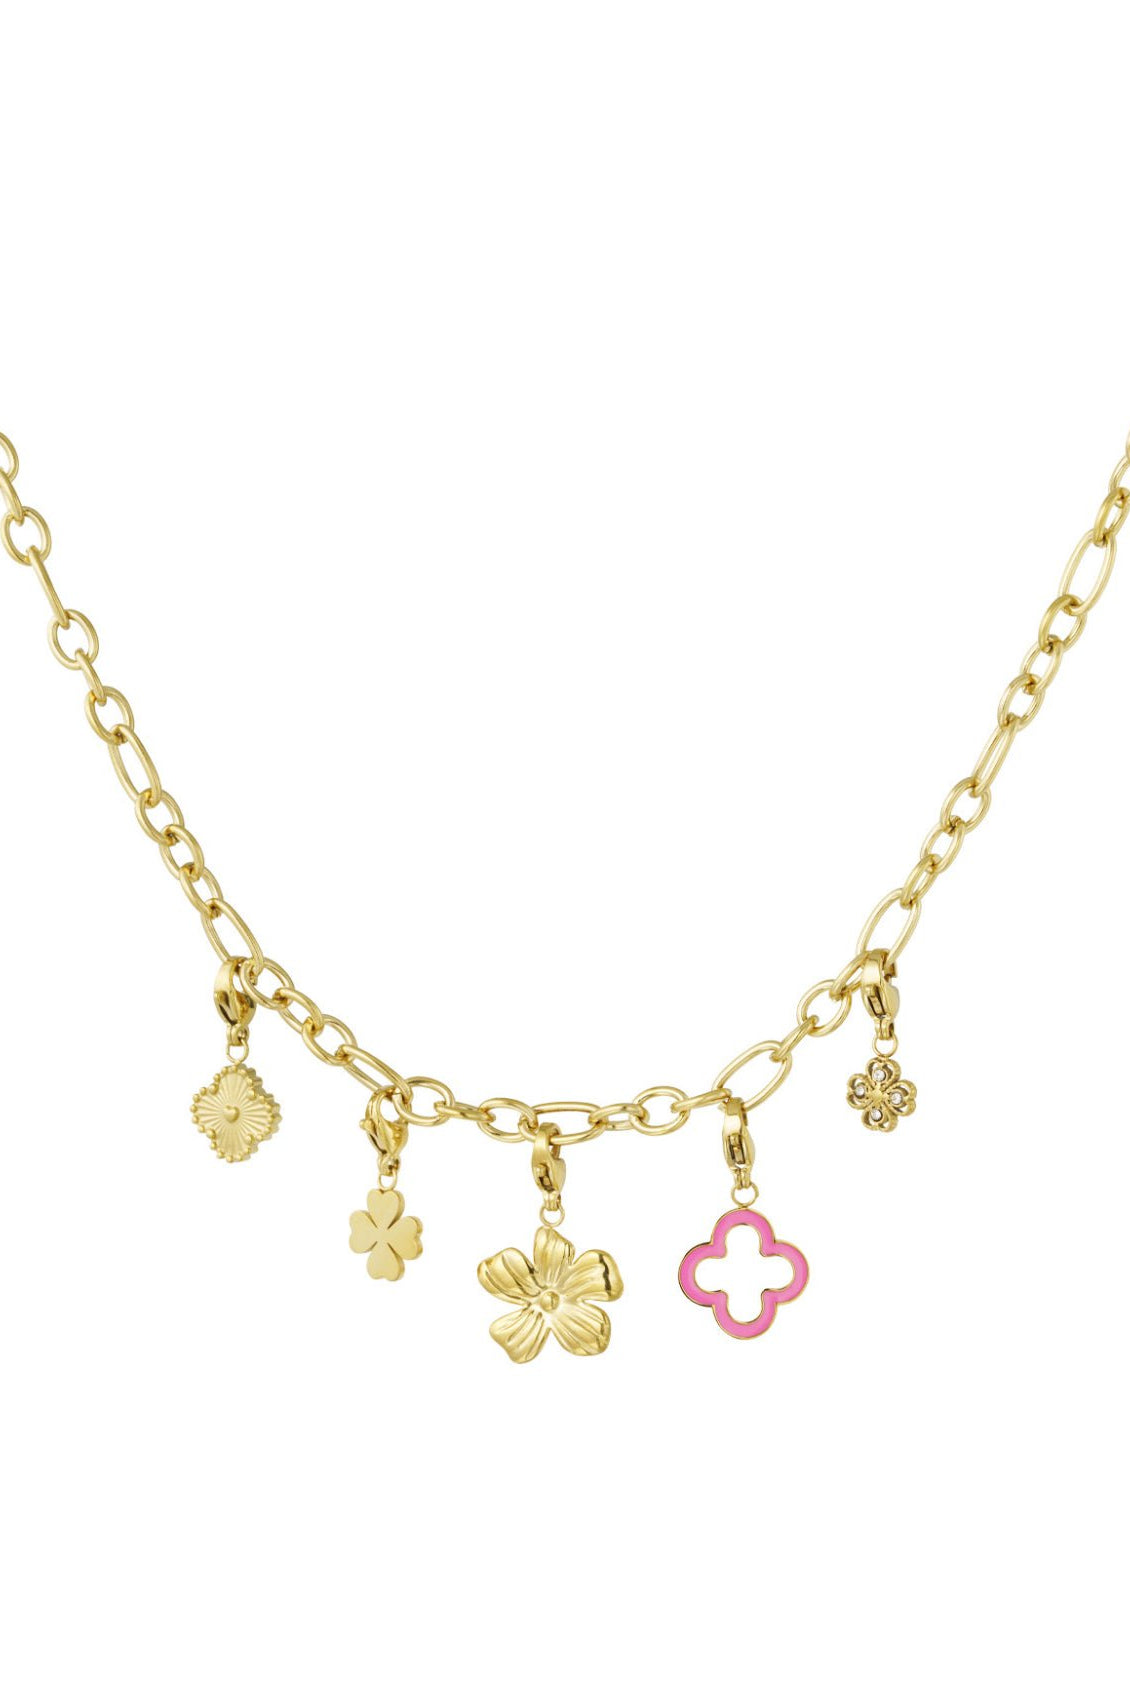 ♥︎CLOVER AND FLOWER KETTING - My Favourites